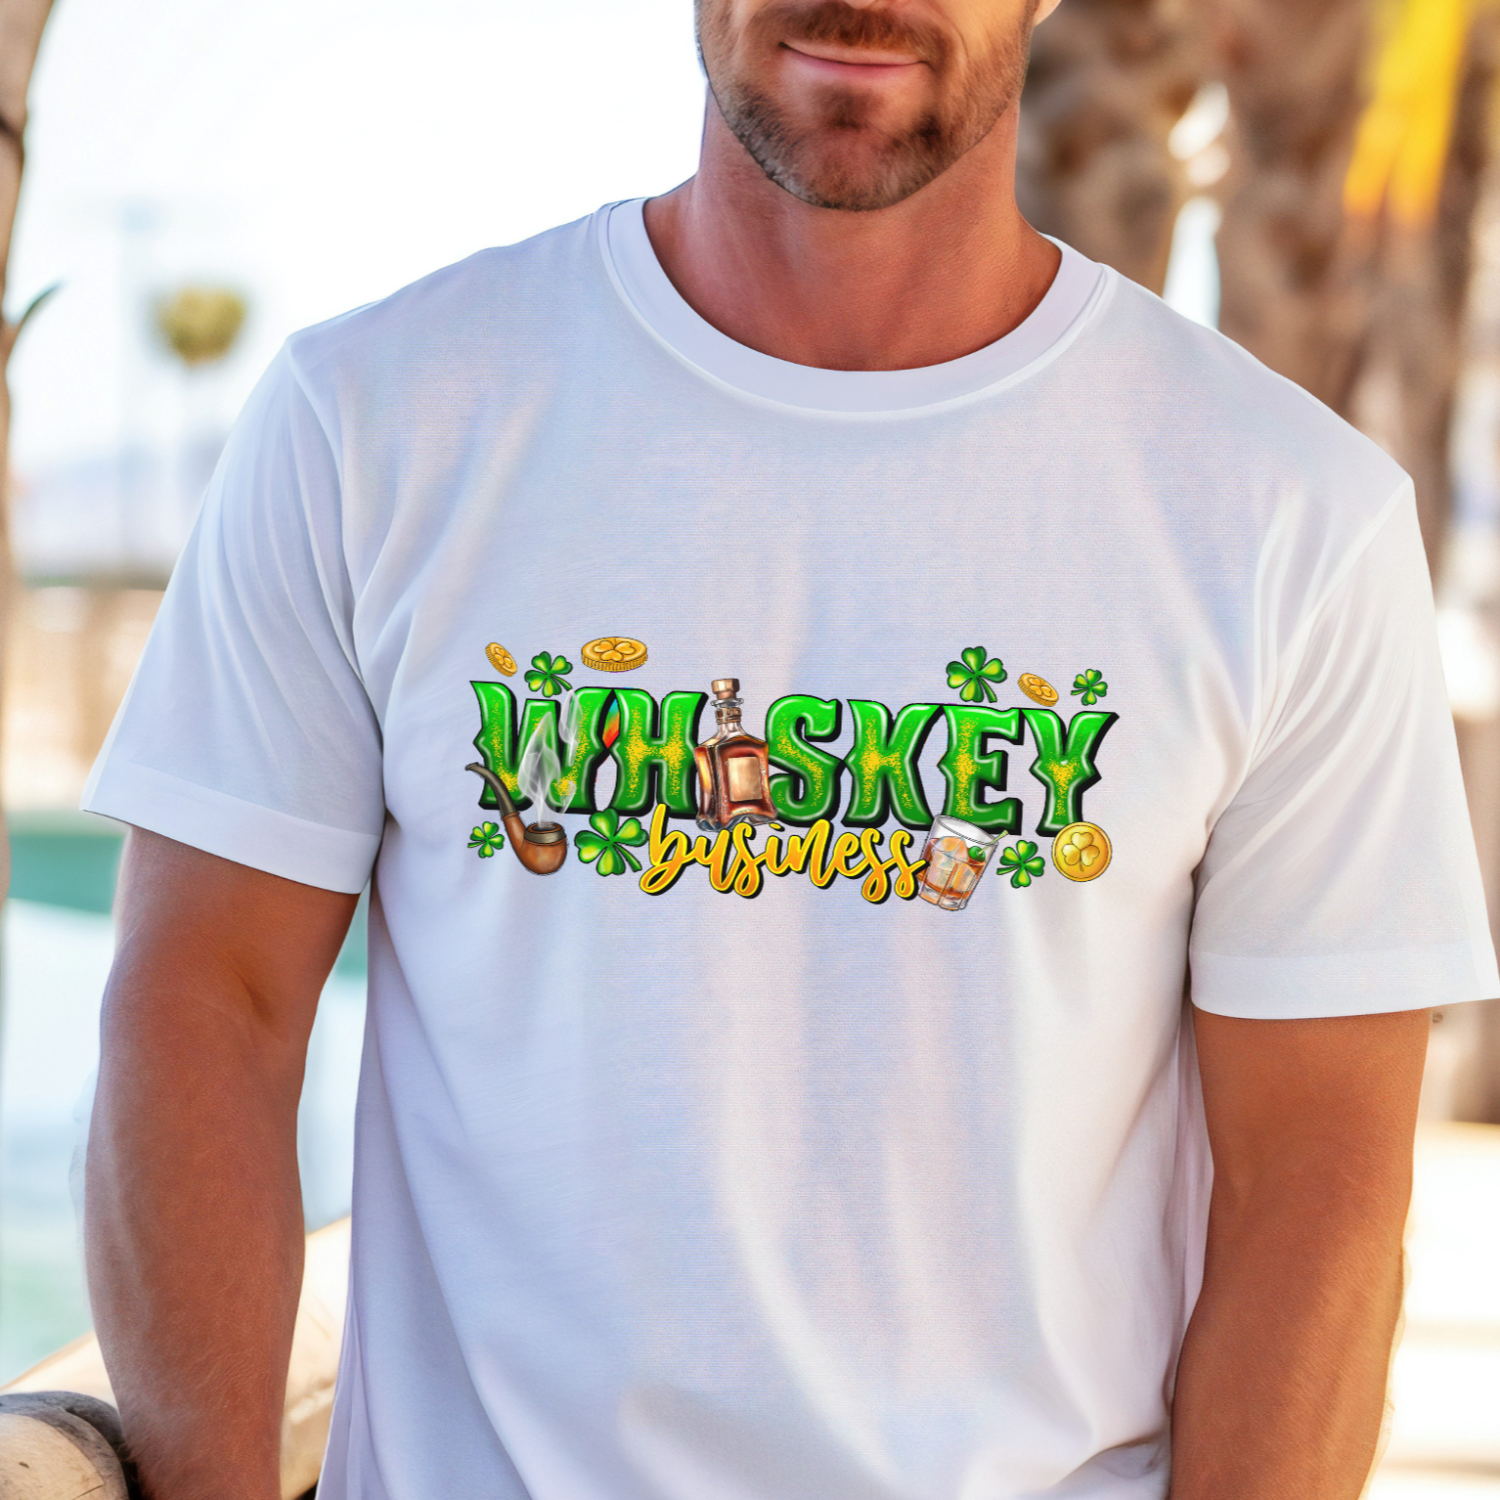 Whiskey Business Shirt - St. Patrick's Day Gift